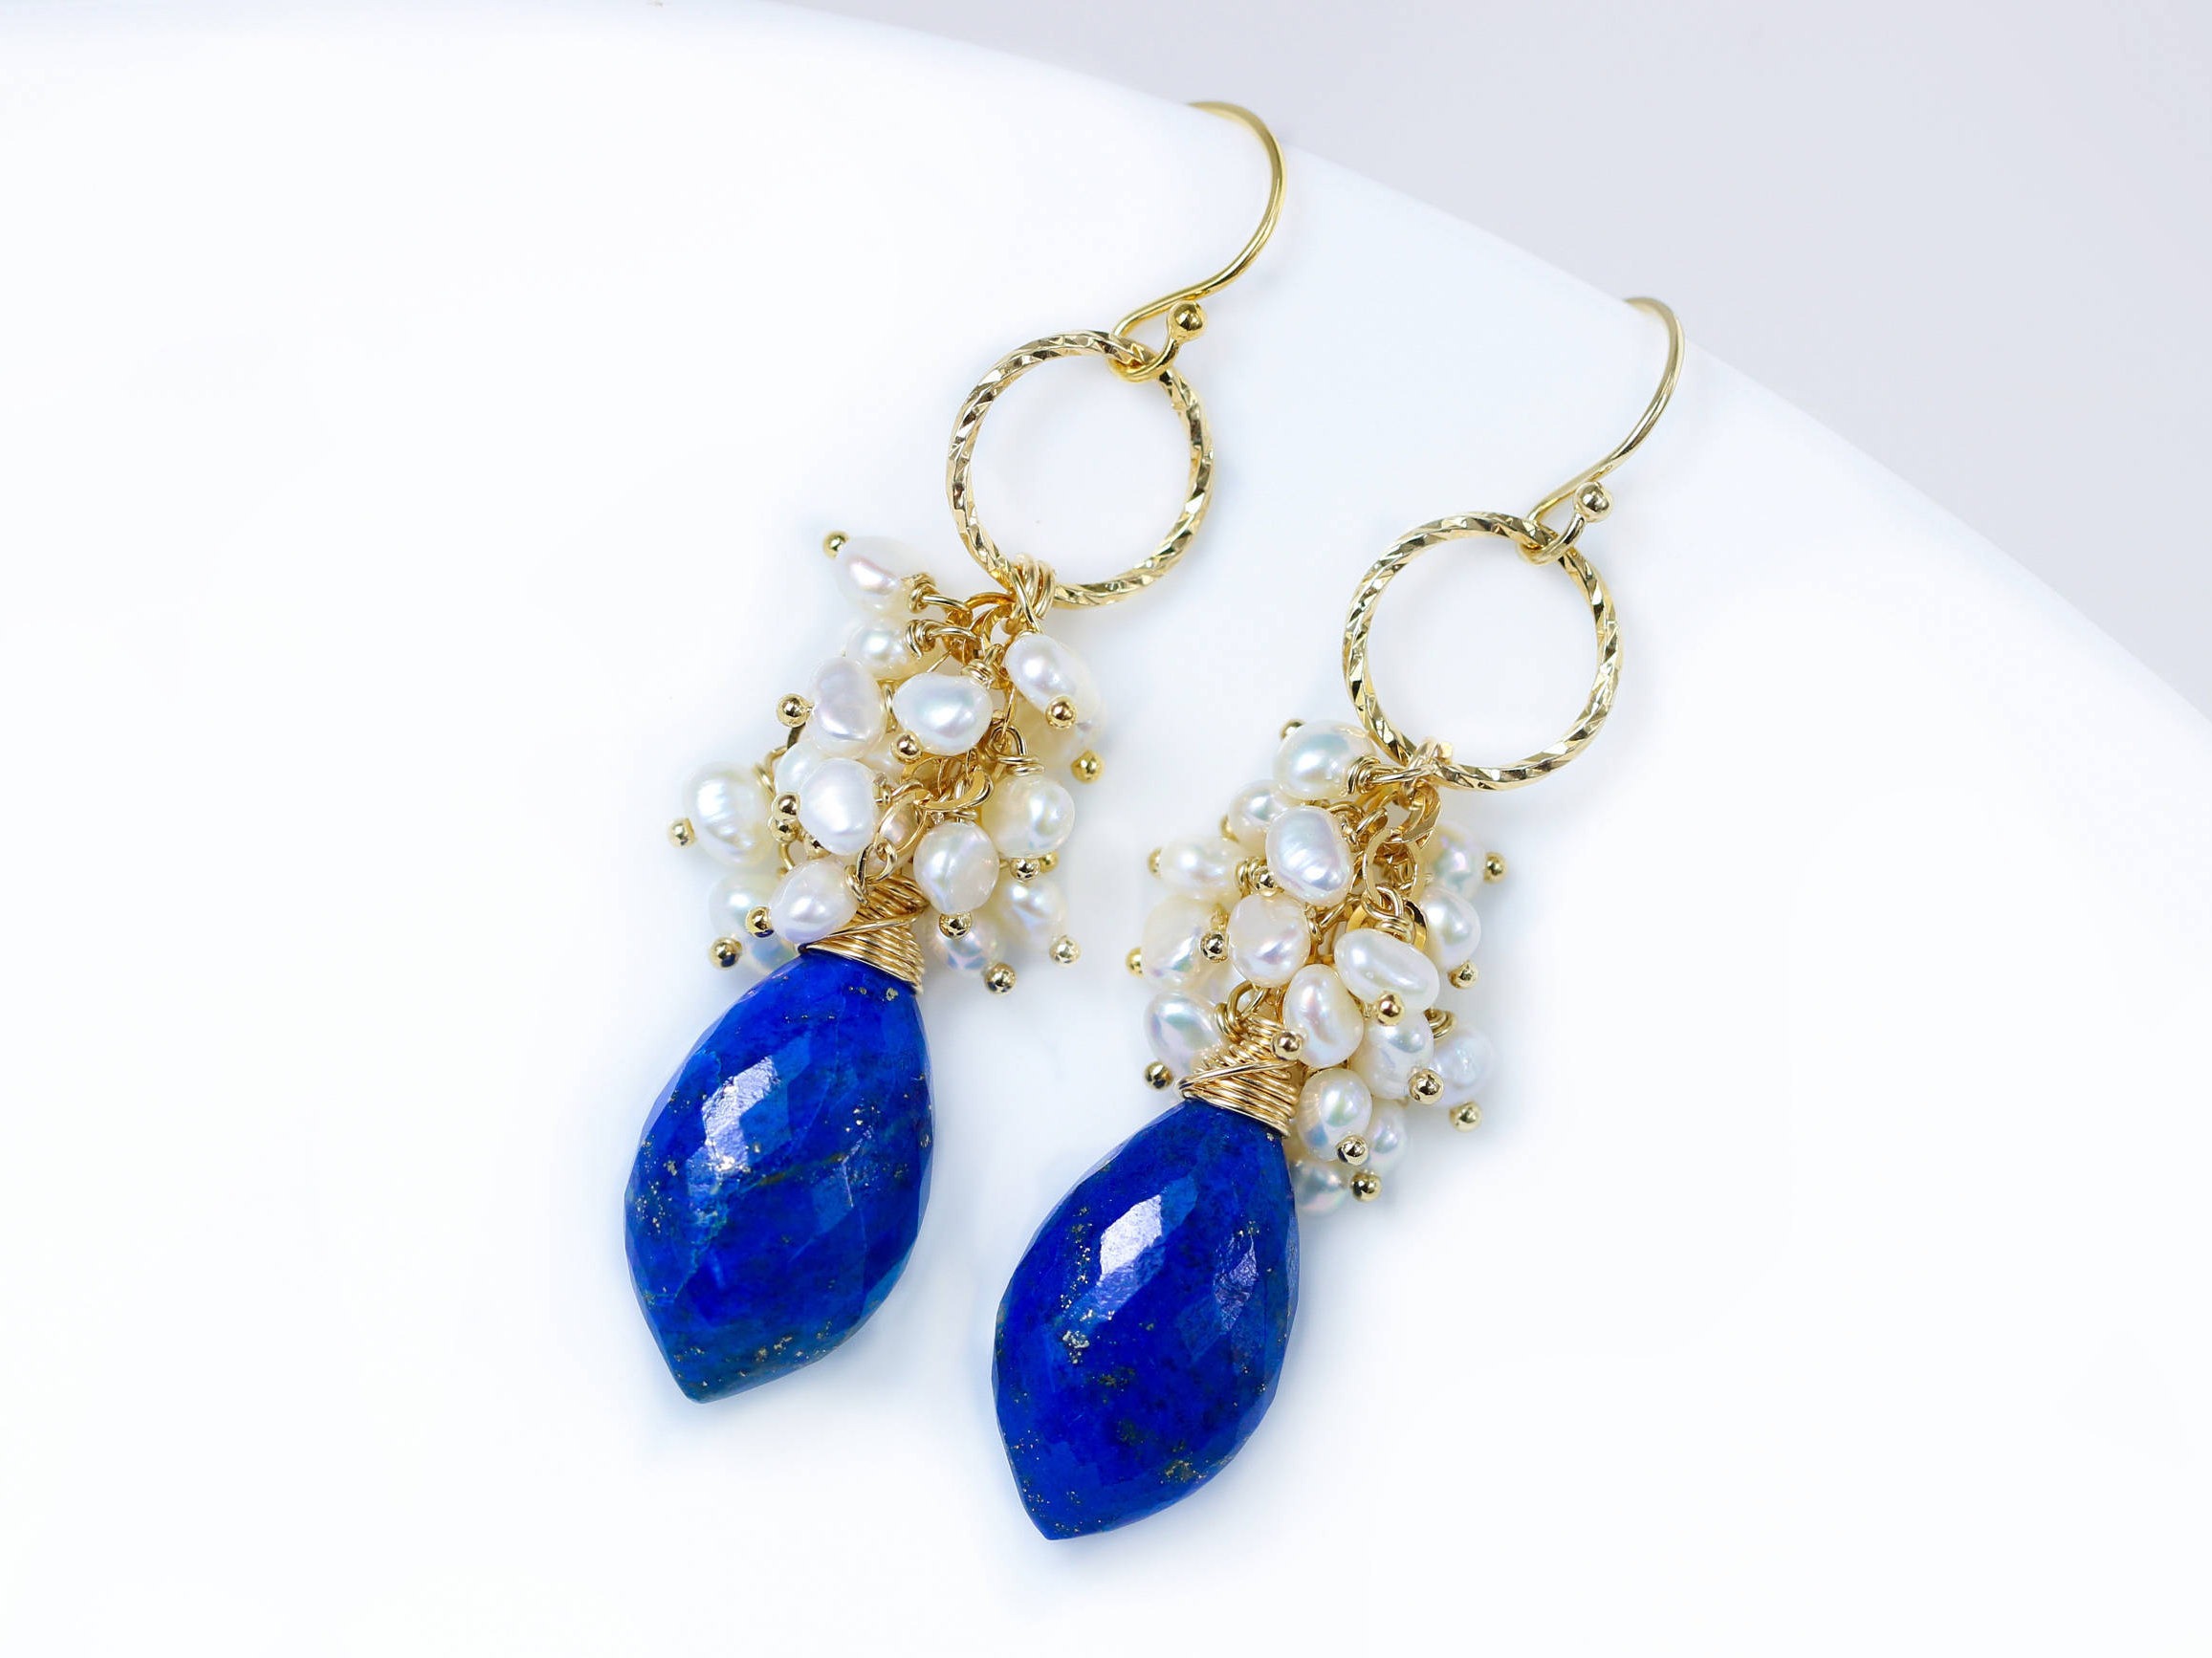 Luxury Lapis Lazuli and White Pearls Cluster Earrings in Gold Filled ...